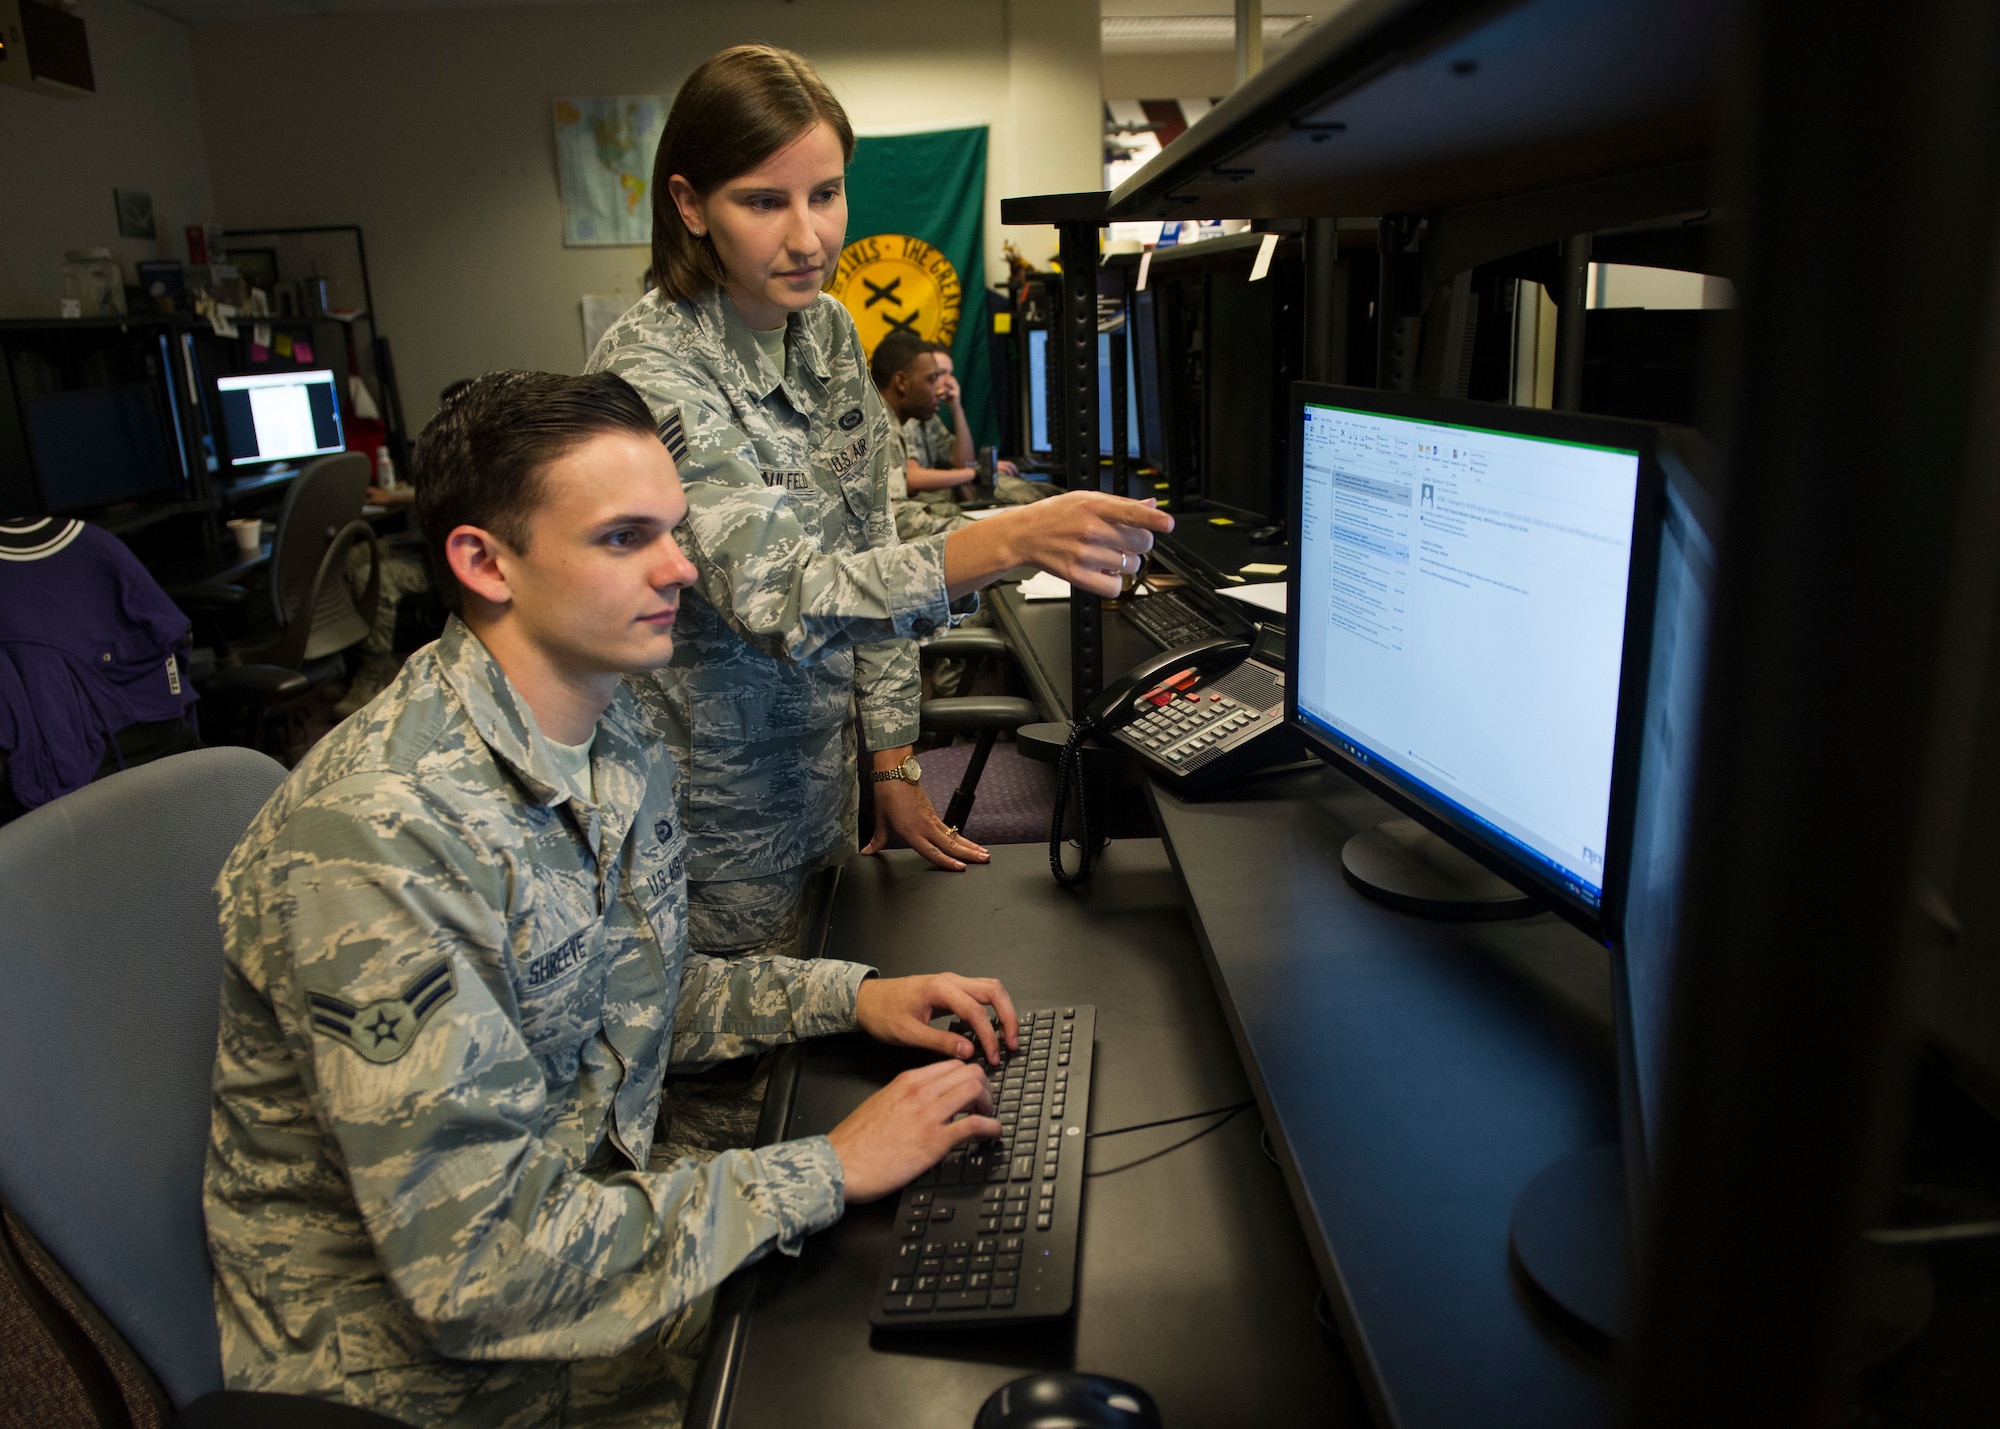 Staff Sgt. Elizabeth Caulfield, Signals Analysis Squadron scientific and technical signals analyst, mentors an Airman on mission operations July 11, 2018 at the National Air and Space Intelligence Center on Wright-Patterson Air Force Base, Ohio. Caulfield was named one of the 12 Outstanding Airmen of the Year for the Air Force. (U.S. Air Force photo/ Senior Airman Michael Hunsaker)